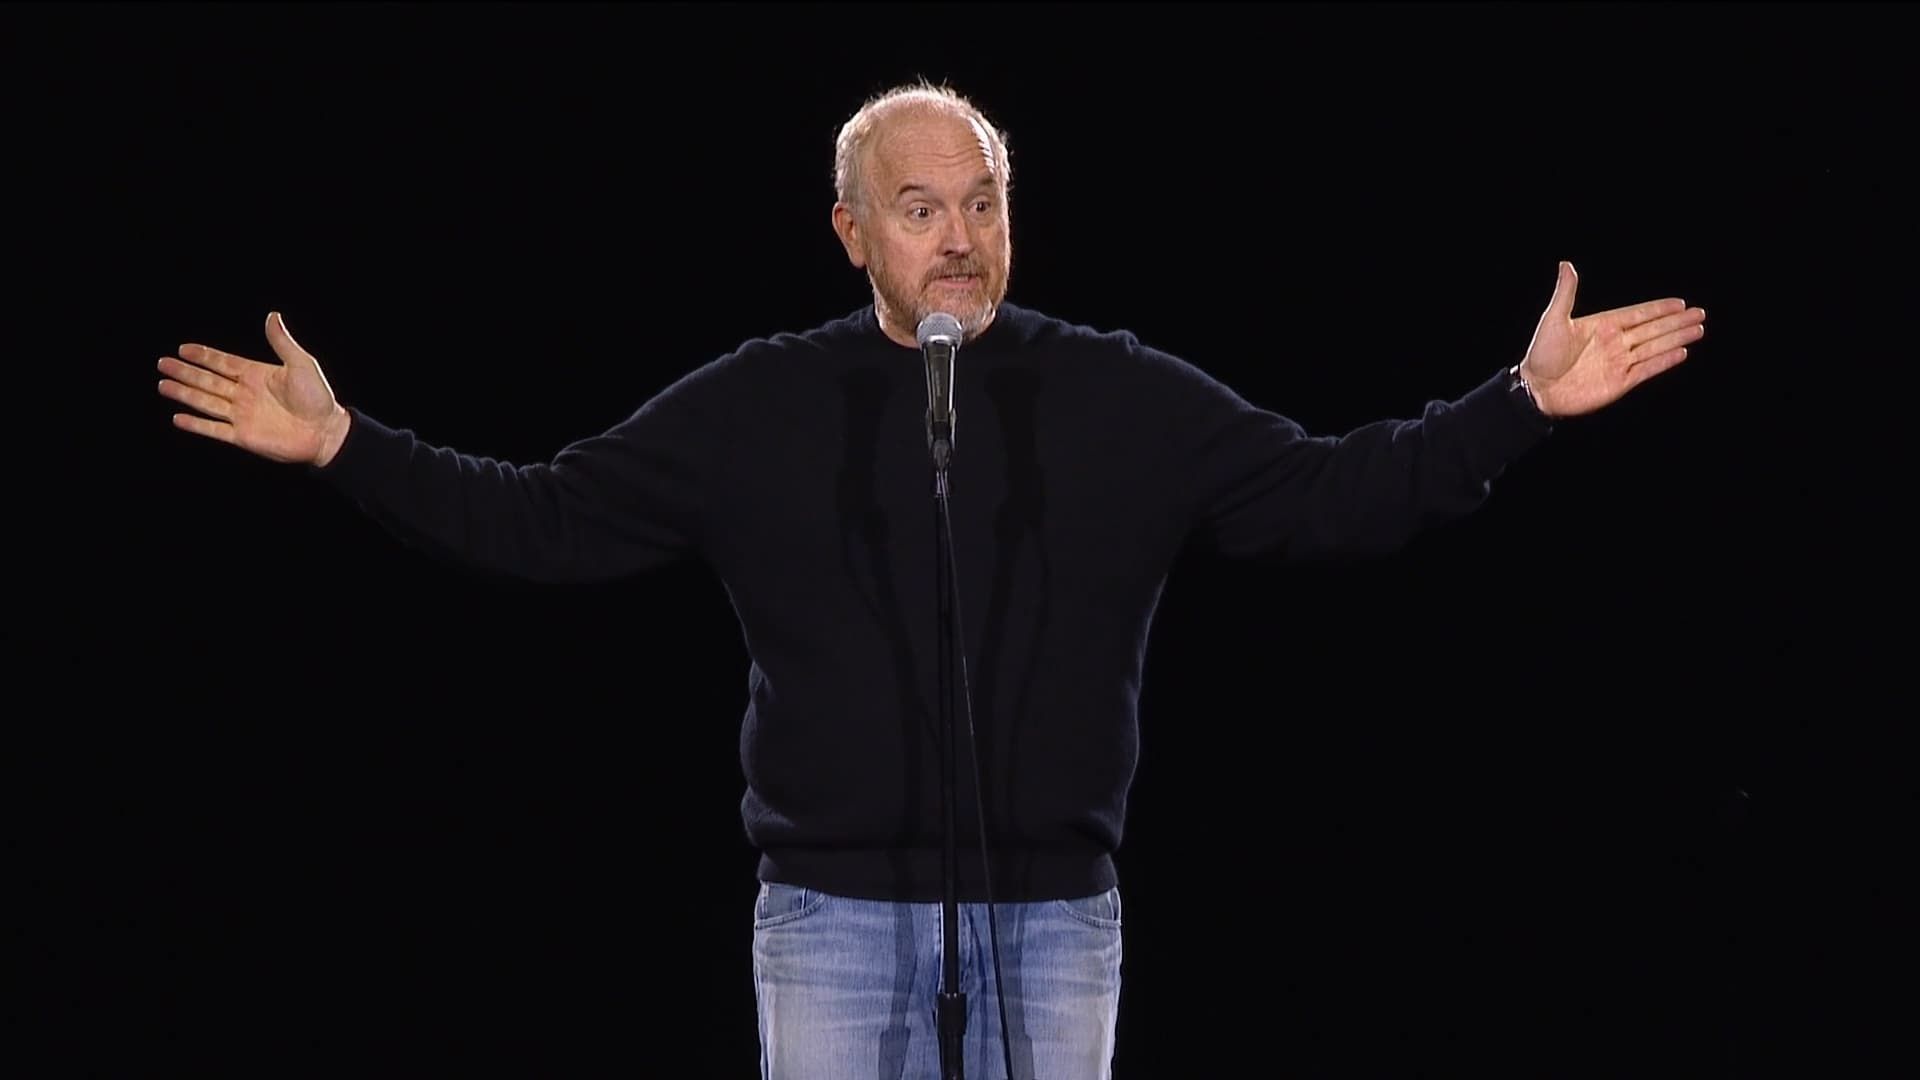 Louis C.K.: Back to the Garden background